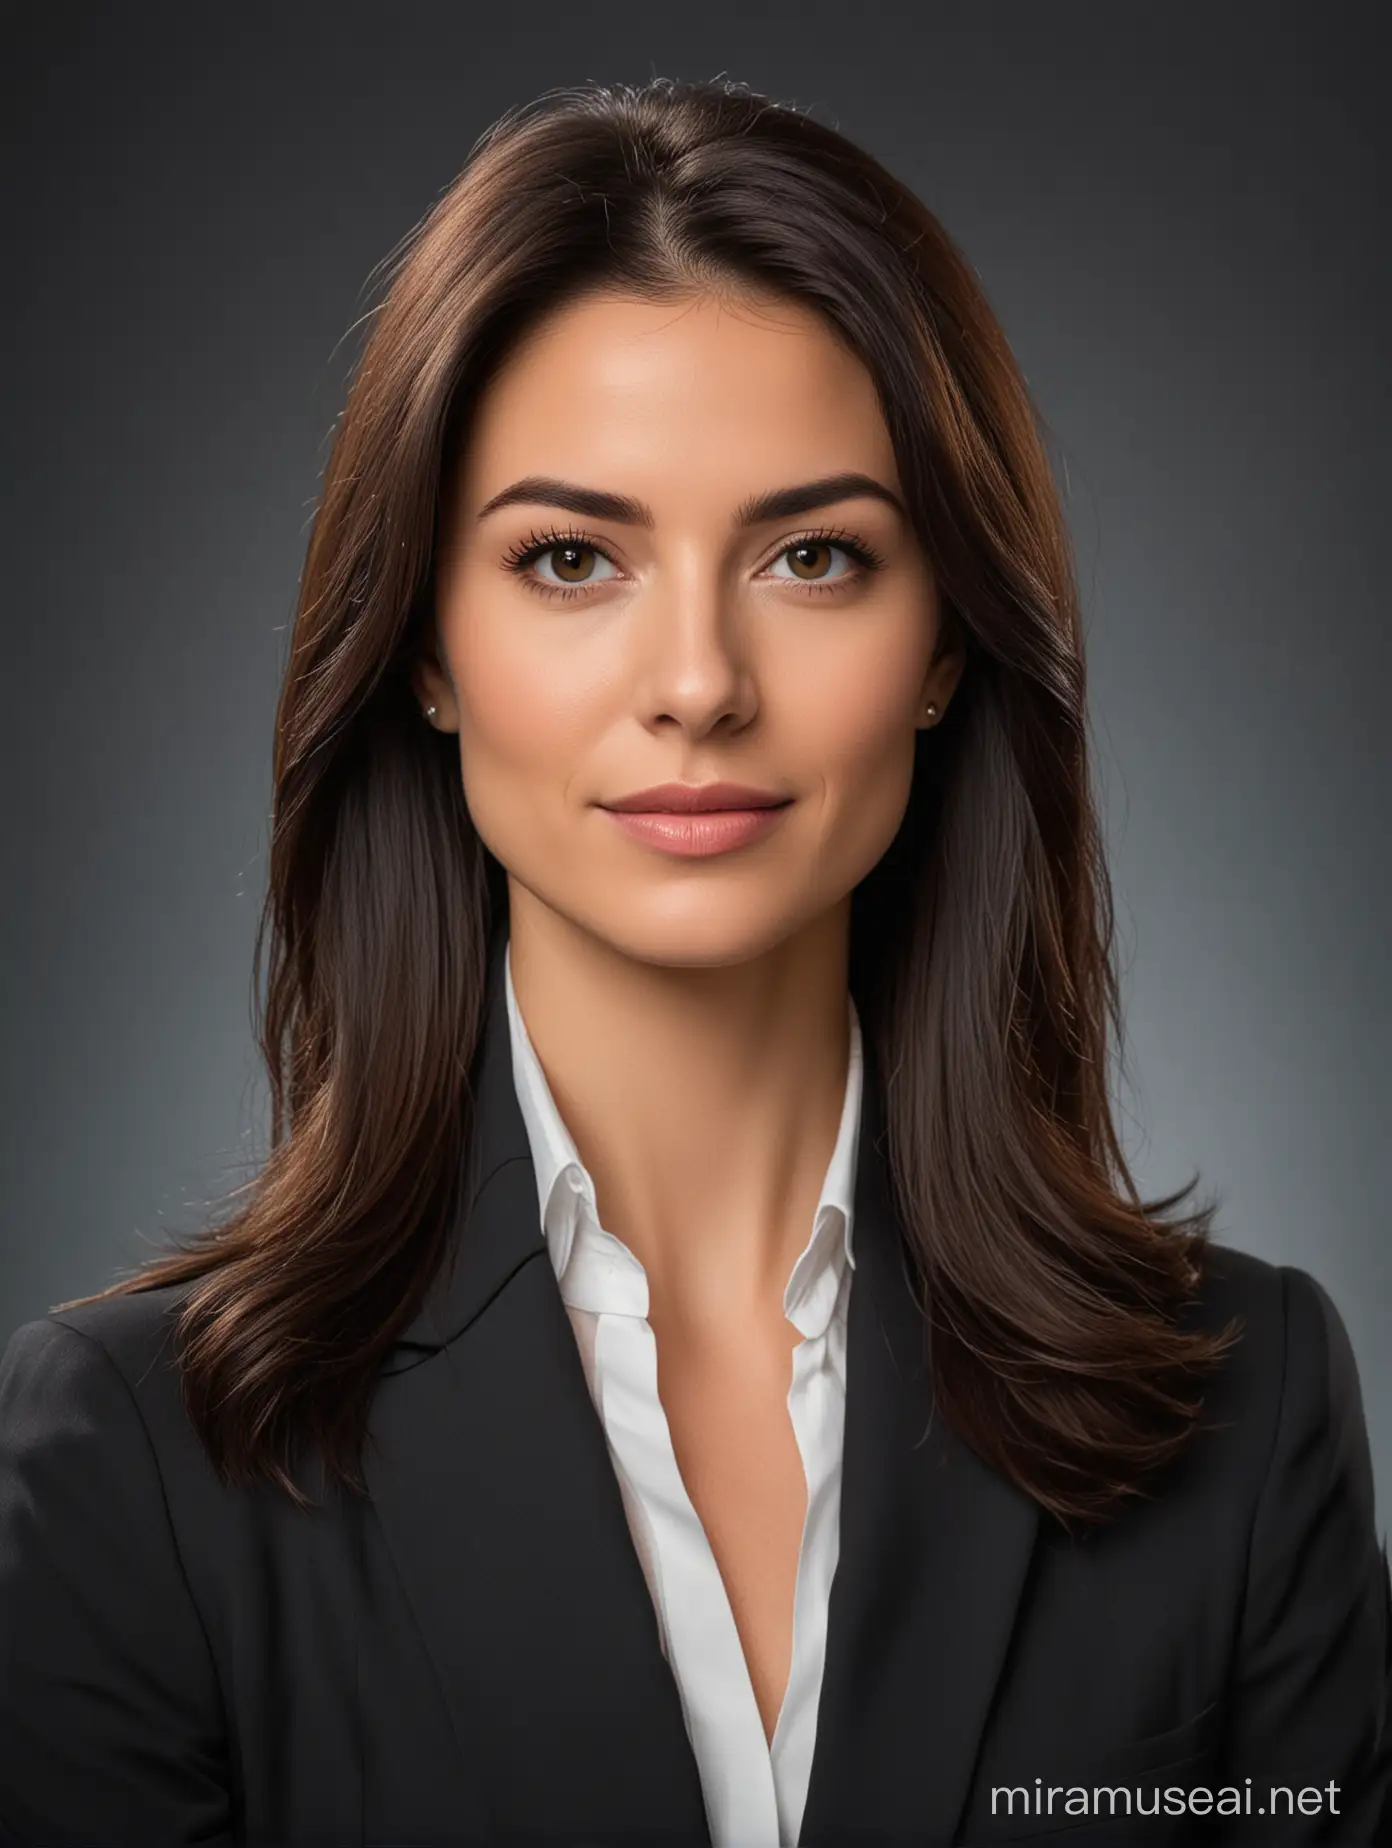 Professional Studio Portrait of a Woman Lawyer with Dark Straight Hair